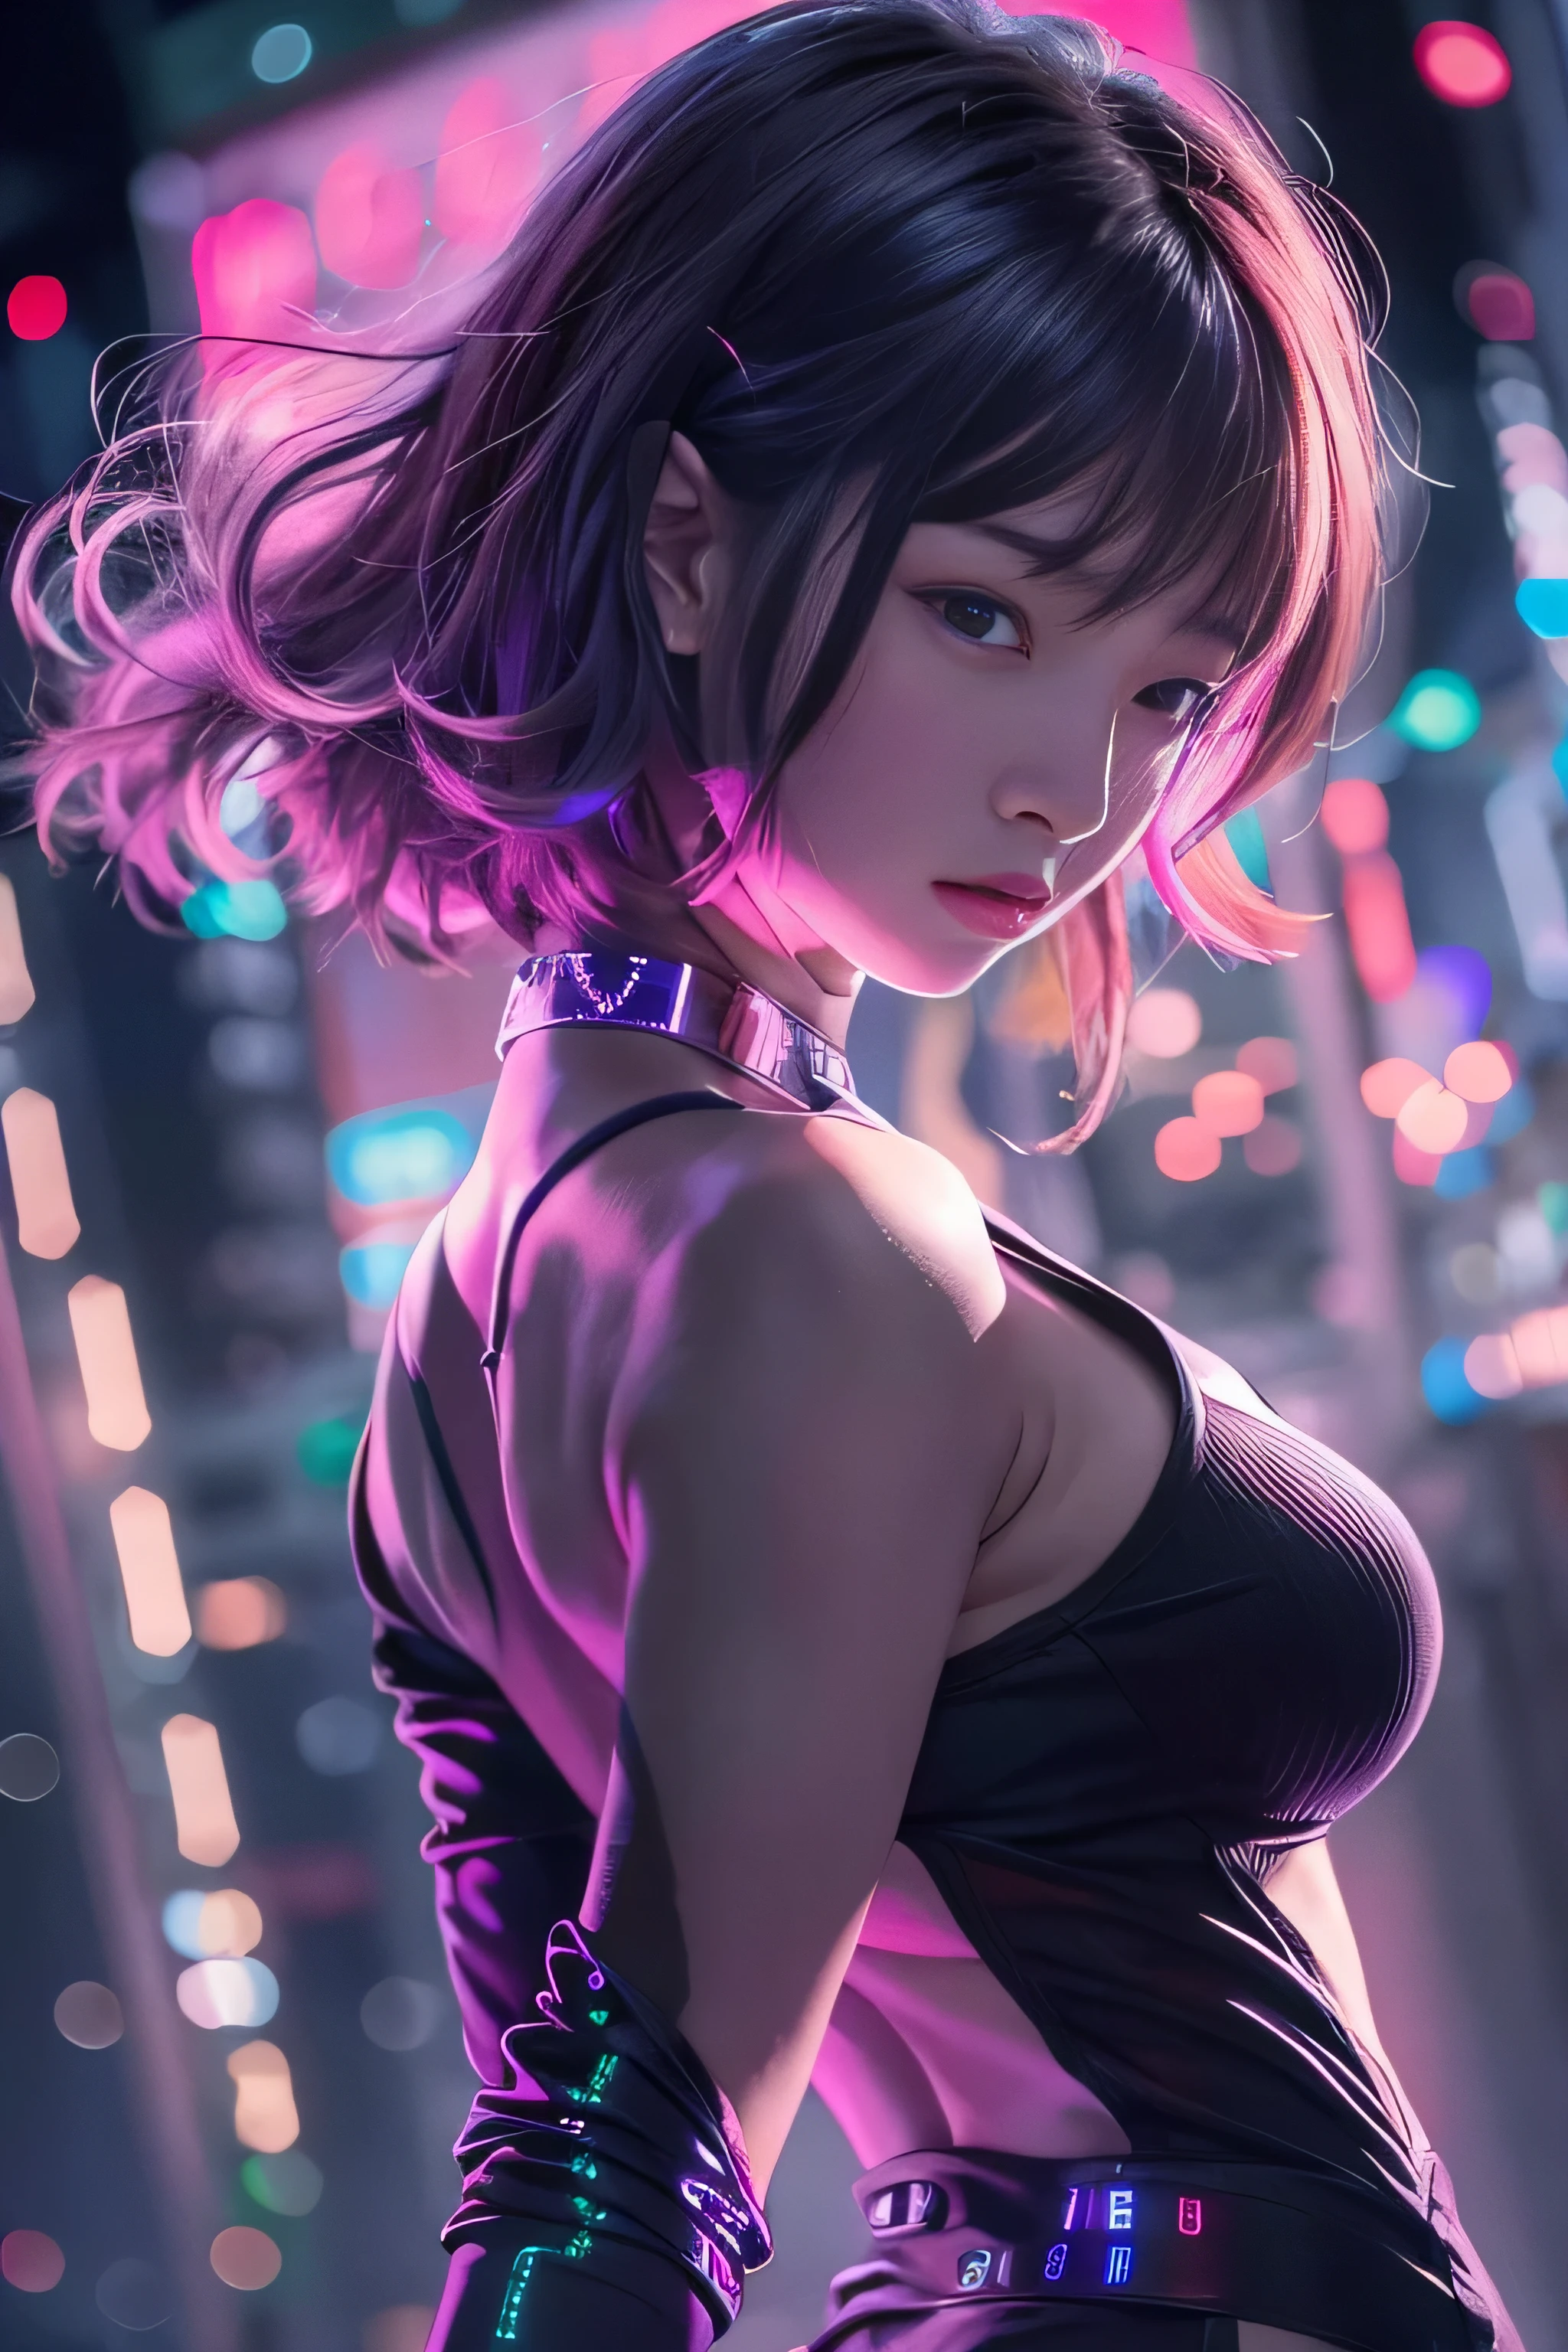 RAW image quality, 1 girl, Japanese, 17 years old, table top, Dystopian city with neon signs and holograms projected on buildings and sky, slim beautiful woman, Surrounded by neon-lit reflections of the cityscape, written boundary depth, Beautiful woman with slim figure, perfect style, (Beautiful curvaceous female body shape:1.4), Woman&#39;s body illuminated by strong neon lighting, high contrast, Shining hologram female body, (walk towards the camera), (Look into the viewer&#39;s eyes), lipstick, Straight very short hair, night, cyberpunk aesthetics, highly detailed lighting, dramatic, In 8K, high detail, skin texture, リアルなskin texture, highest quality, High resolution, Photoreal